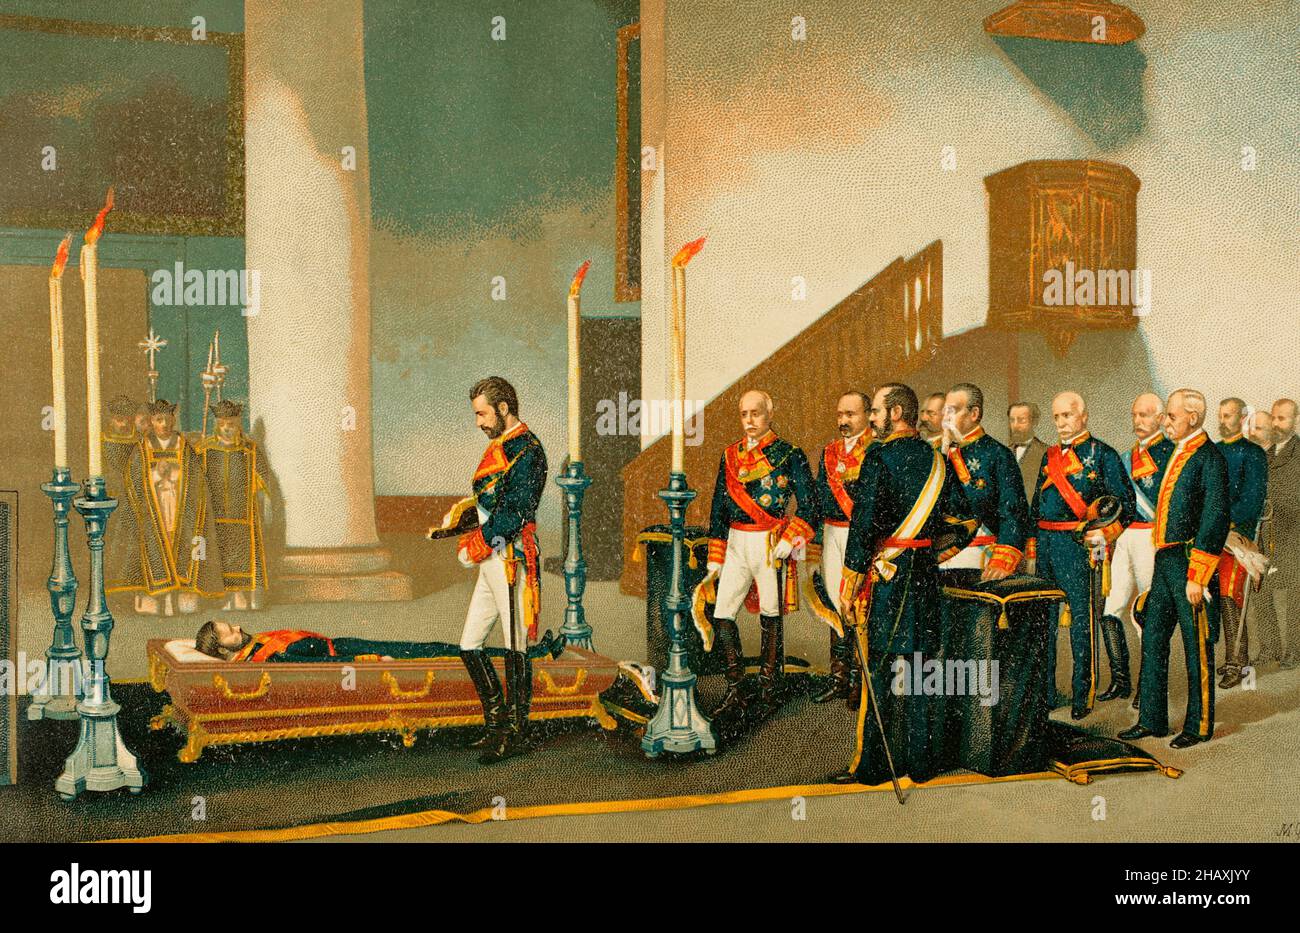 King Amadeo I of Spain (1845-1890) visiting the corpse of General Prim (1814-1870). Scene of the monarch at the Basilica of Atocha (Madrid) to veil the coffin of Prim, on 2 January 1871, who was assassinated in an attack on 27 December 1870. Behind the king stands General Serrano, as well as other Spanish political and military authorities. Copy of the painting by Antonio Gisbert. Chromolithography. 'Historia General de España' (General History of Spain), by Miguel Morayta. Volume VIII. Madrid, 1894. Stock Photo